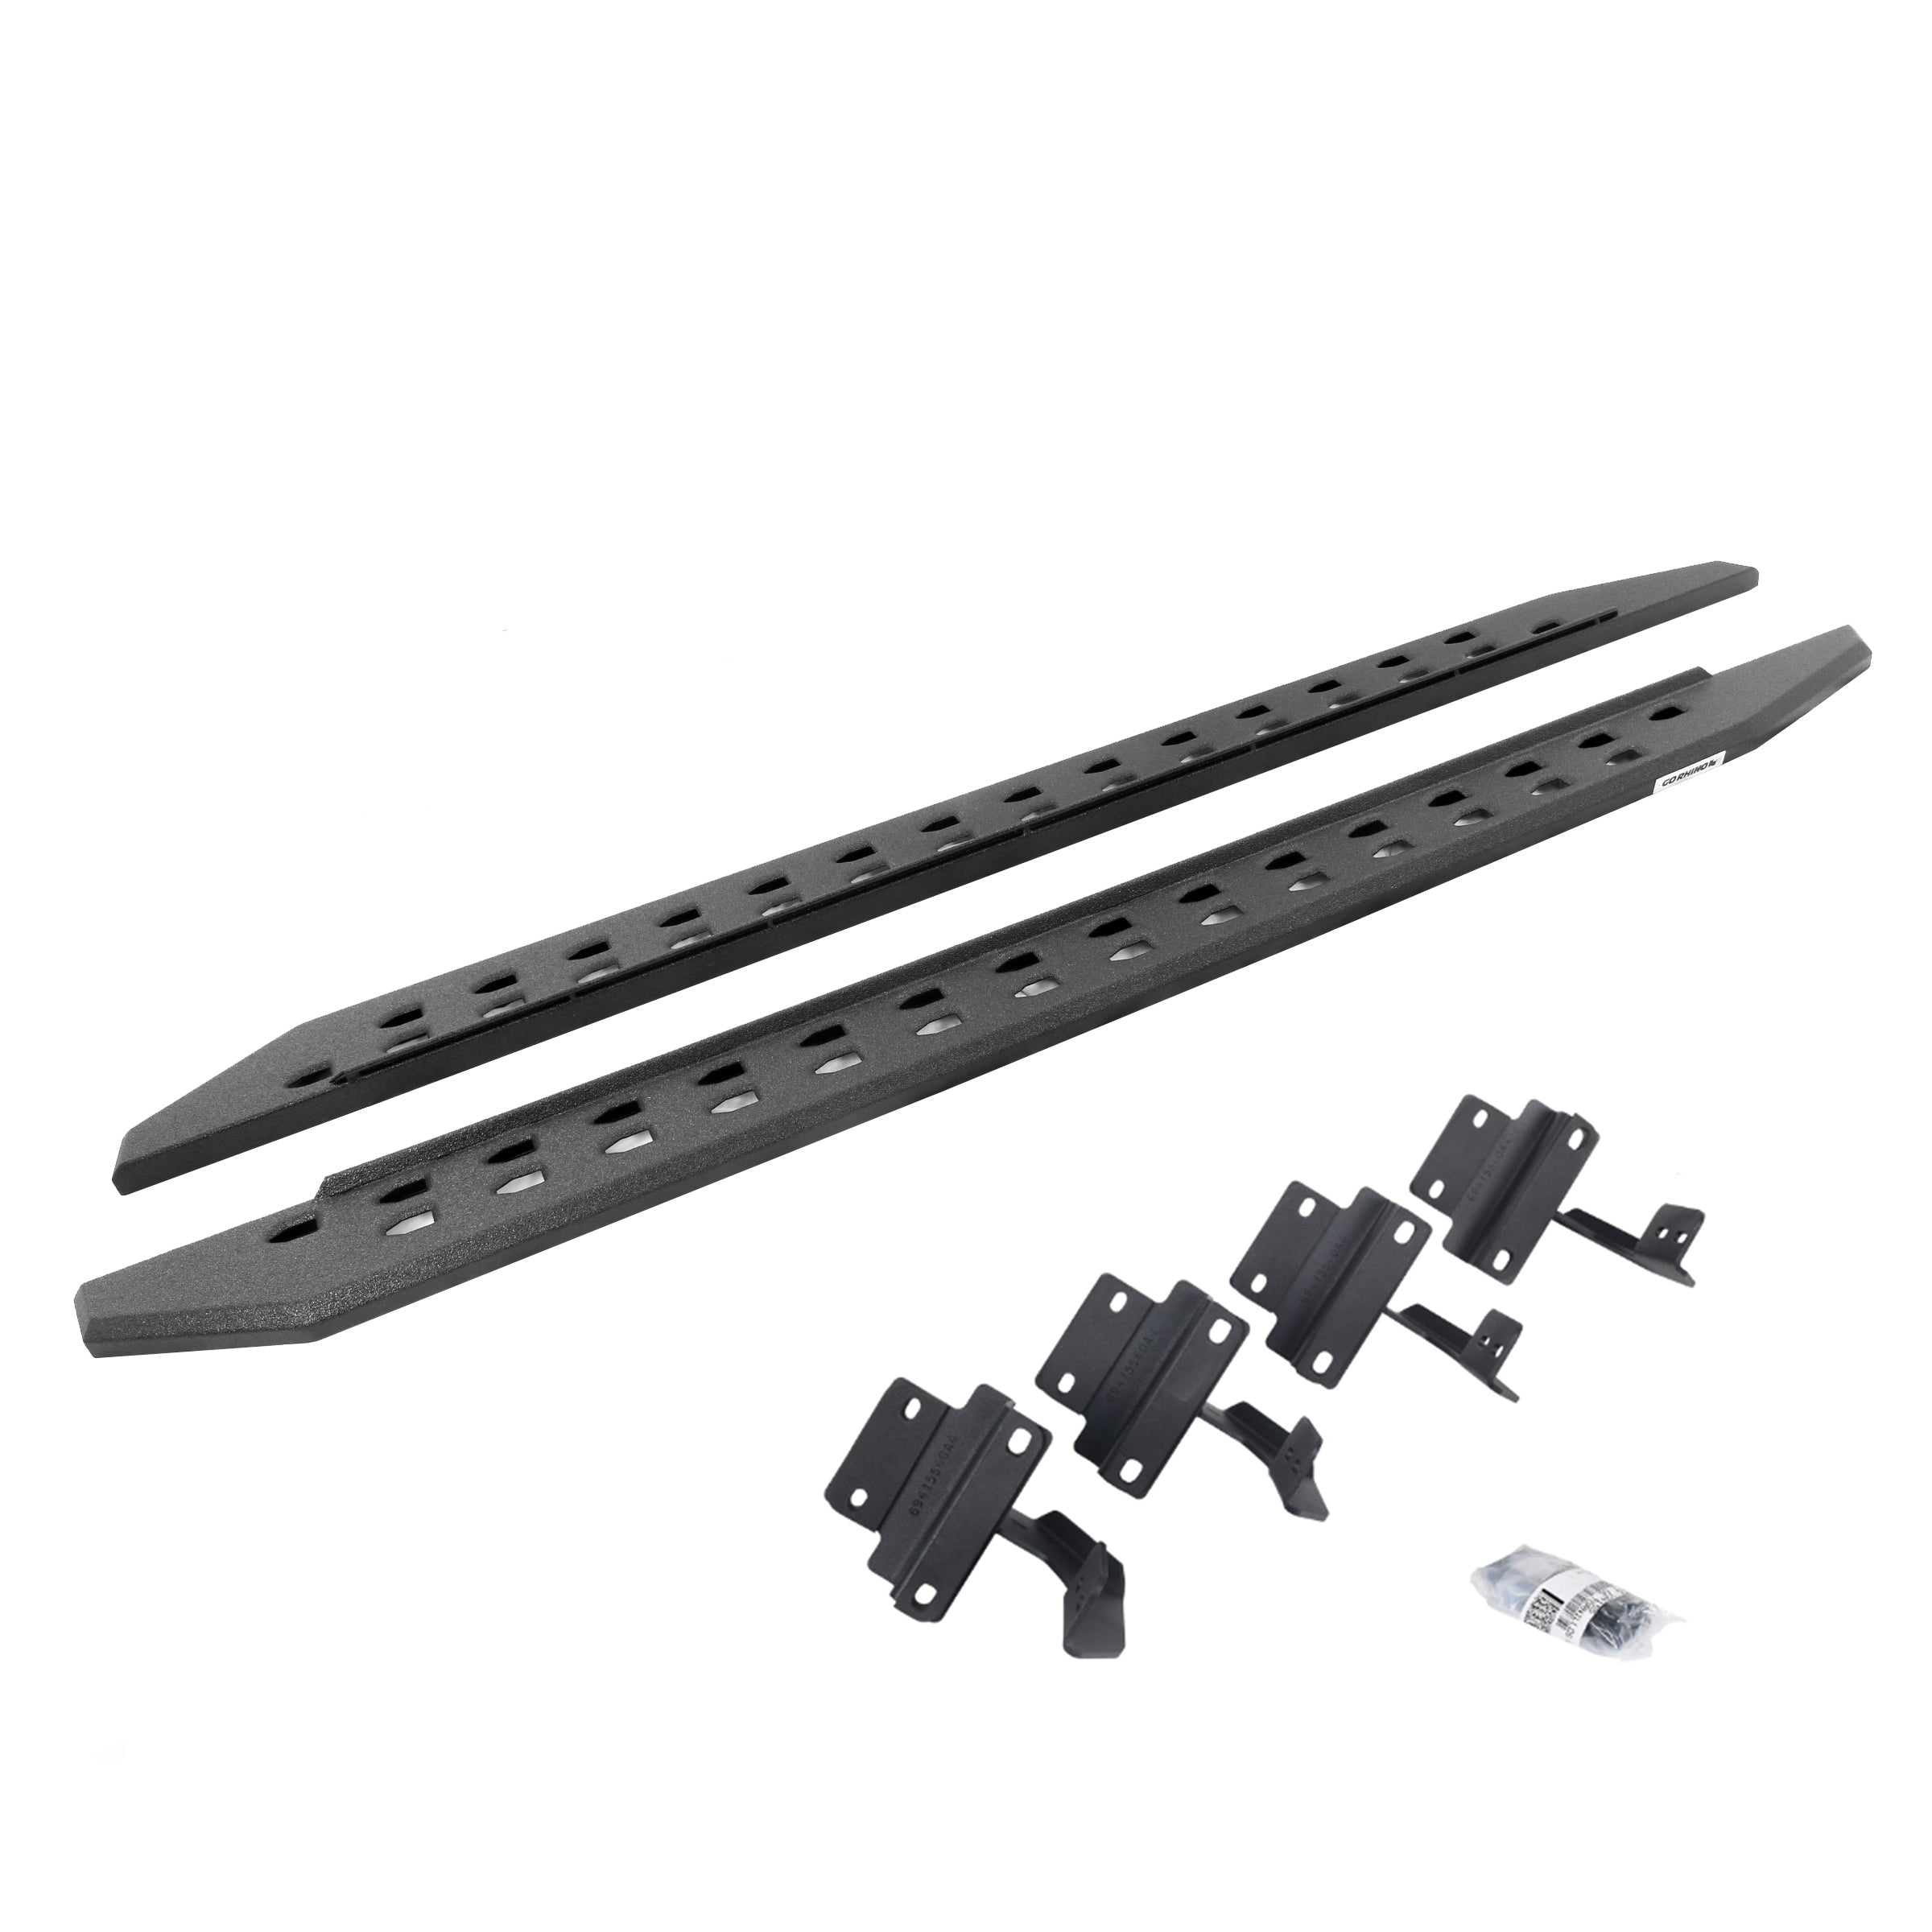 Go Rhino Ford (Extended Cab Pickup - Leaf) Running Board 69417780ST